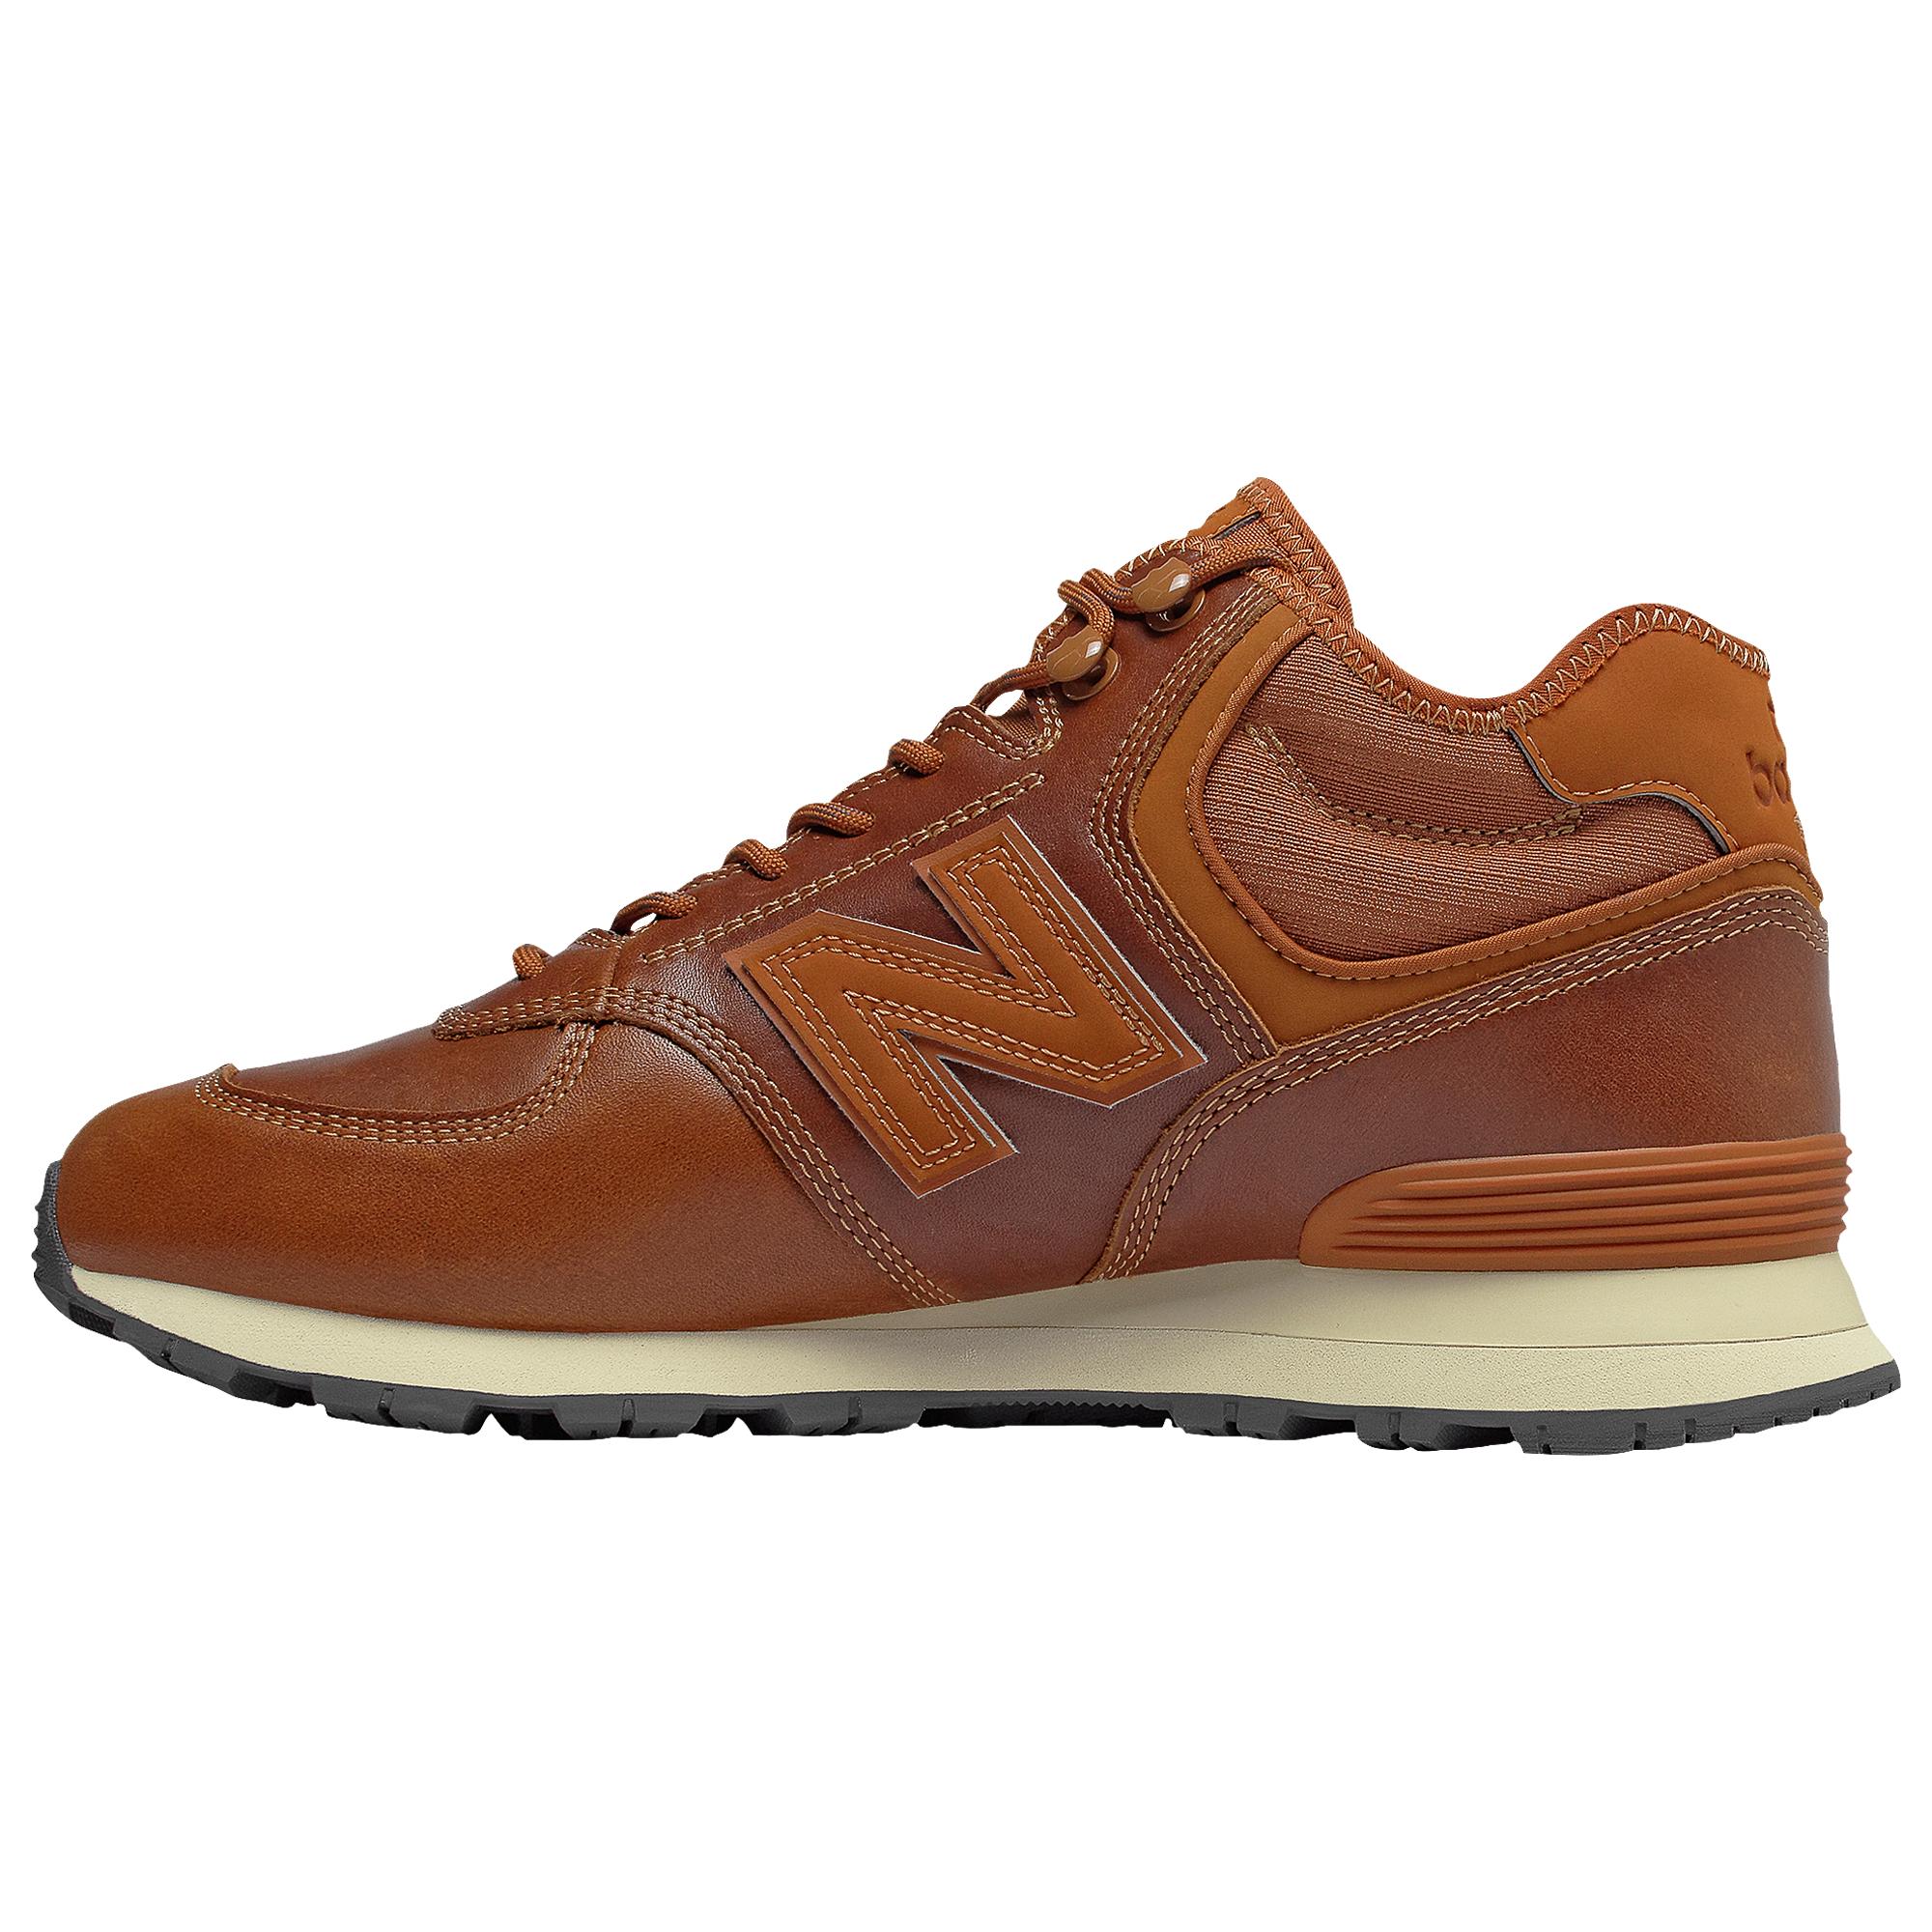 New Balance Leather 574 Mid-cut Running Shoes in Orange (Brown ...